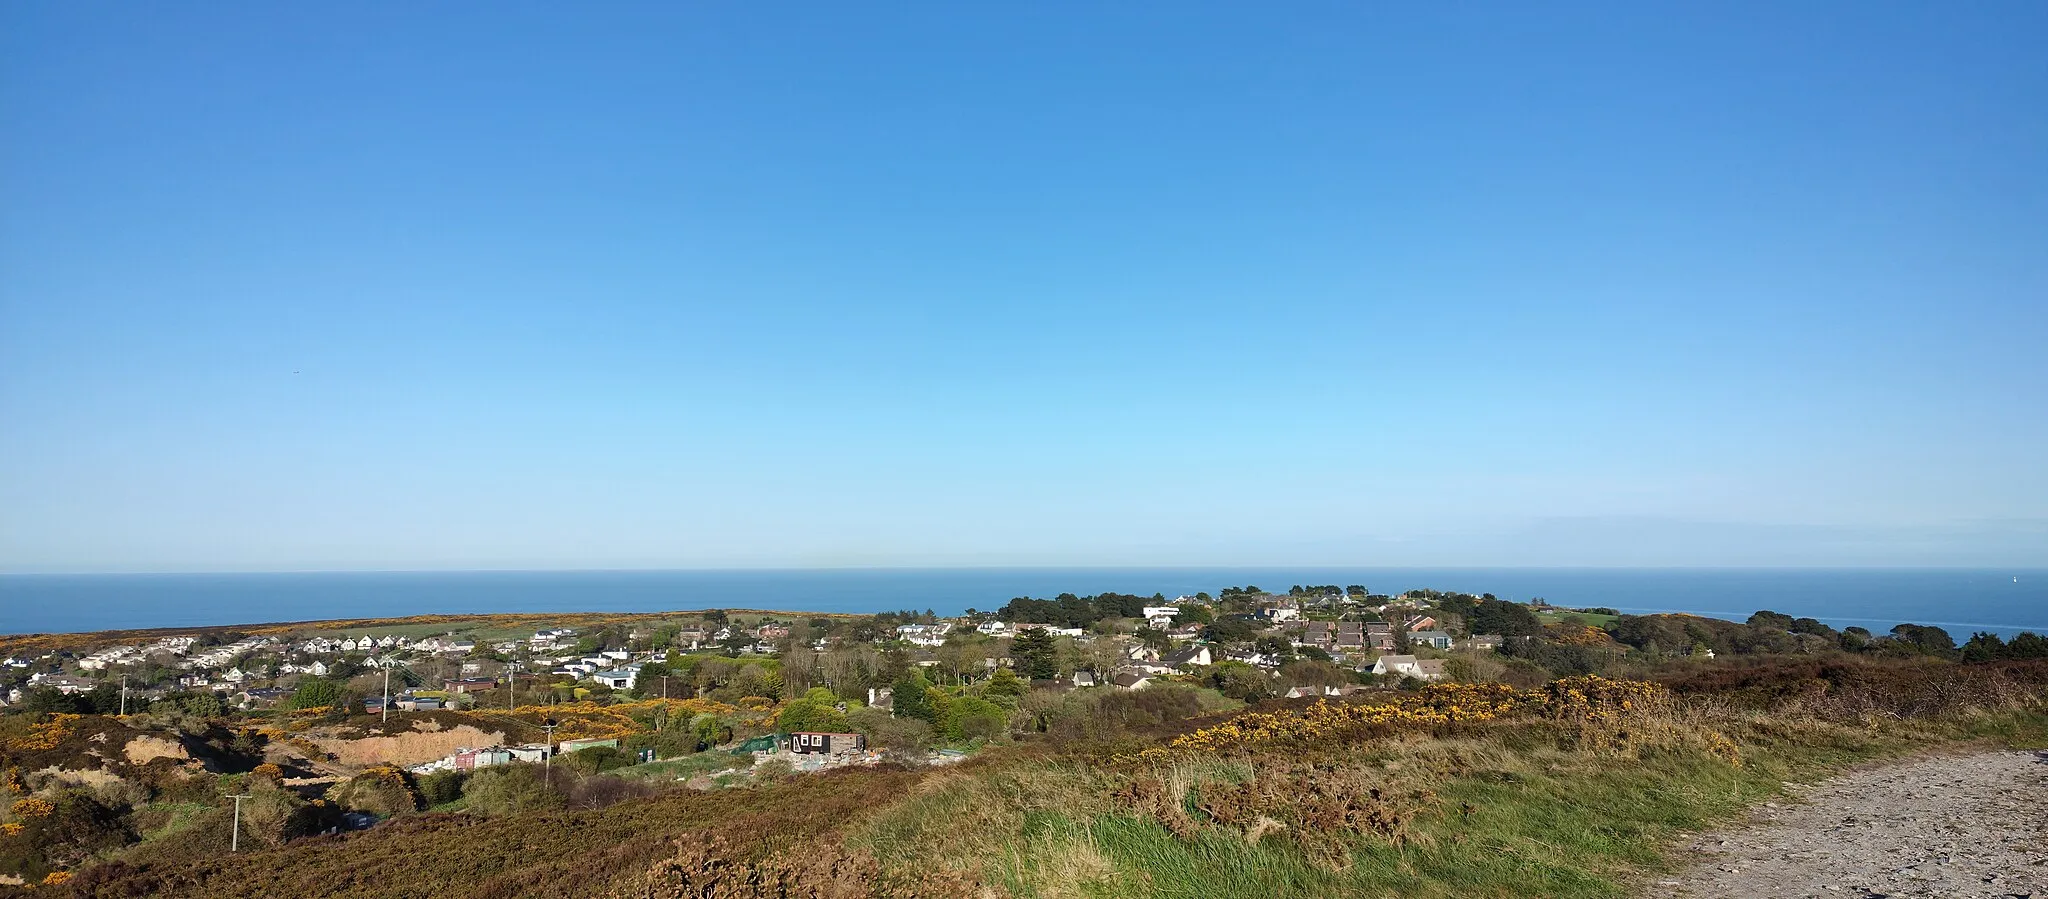 Photo showing: Ben of Howth, east view
Irish sea visible